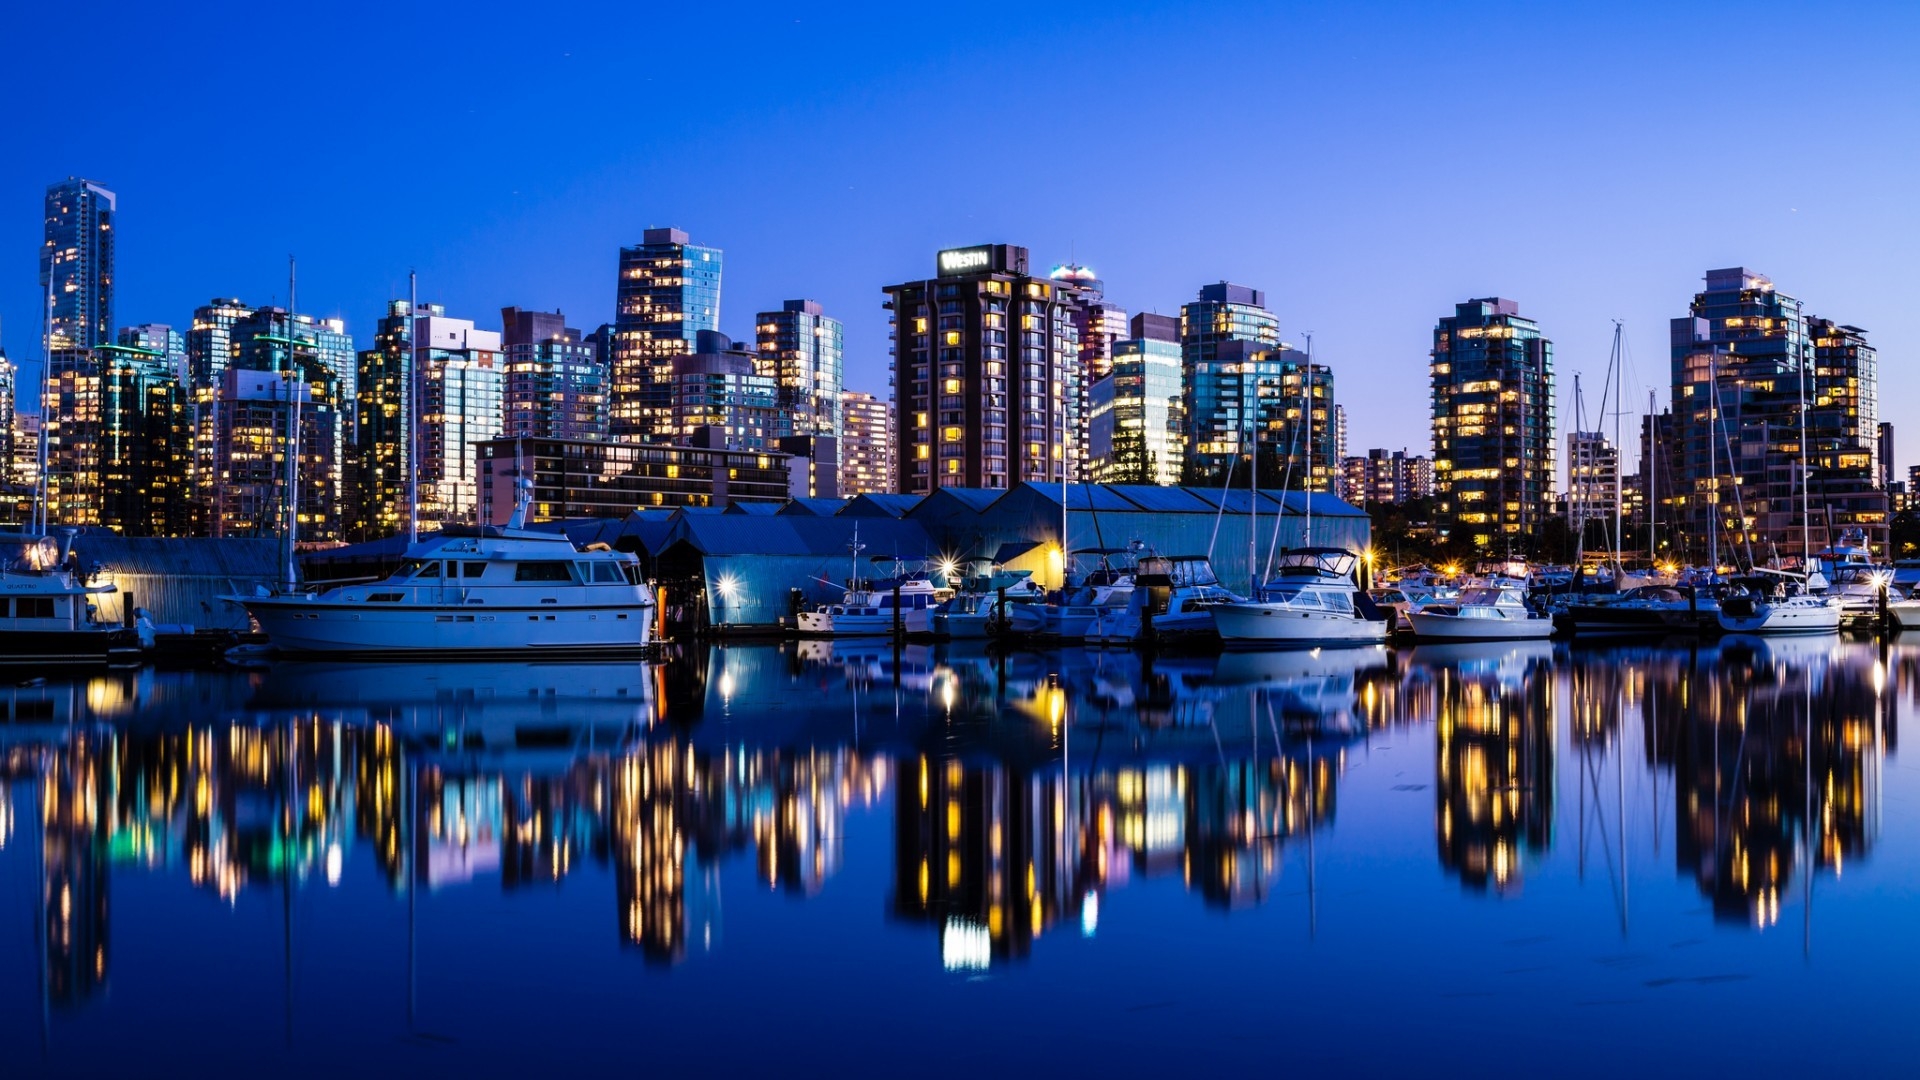 Vancouver Canada for 1920 x 1080 HDTV 1080p resolution